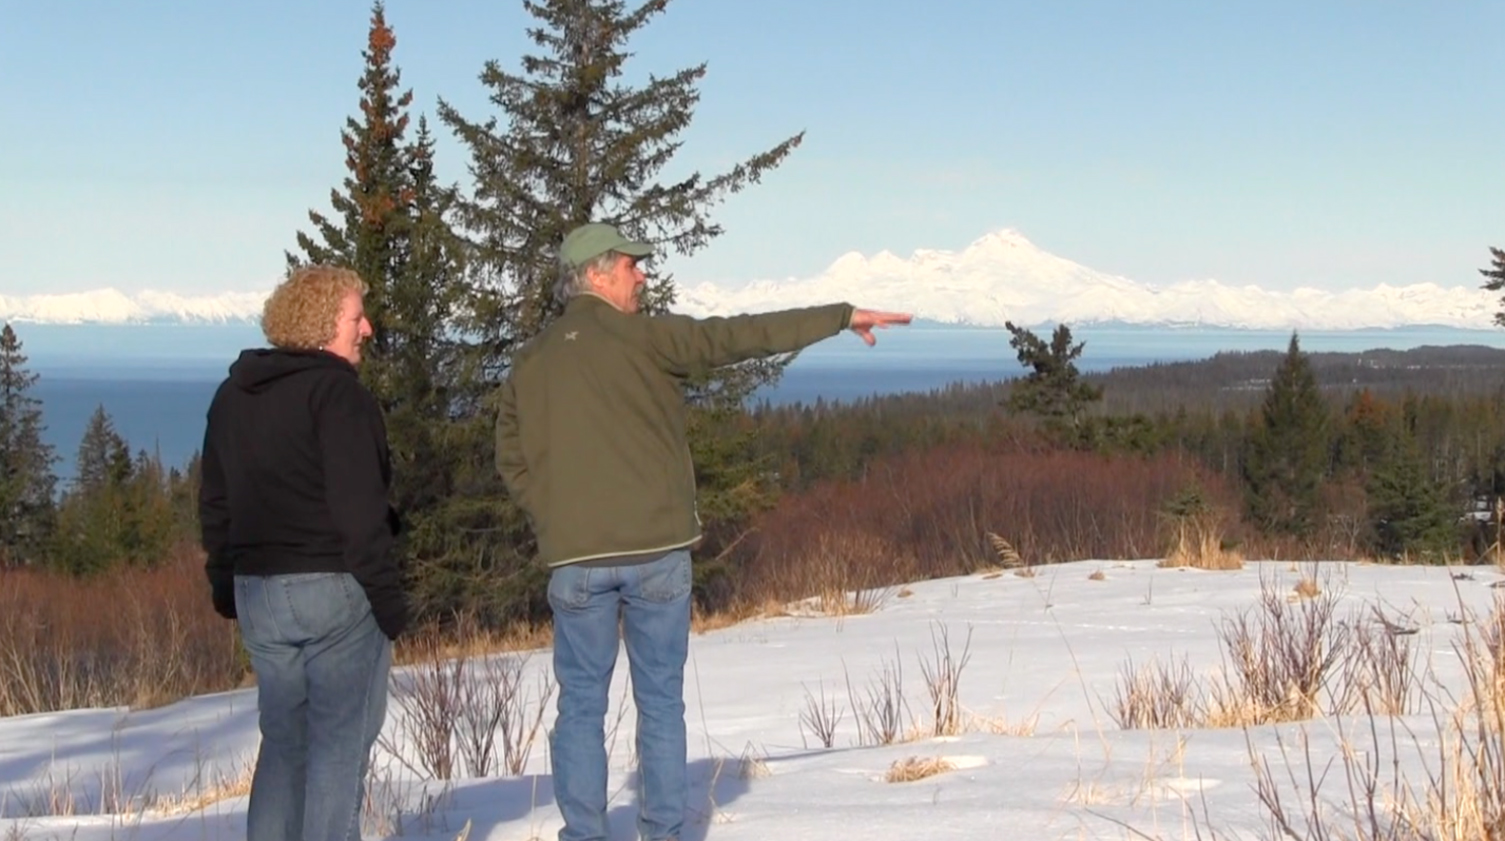 Dana Stabenow, left, and builder Scott Bauer, right, walk Stabenow’s property to select a site for the project. The area includes views of Cook Inlet, Augustine Volcano, Mount Iliamna and Redoubt Volcano.-Photo Provided